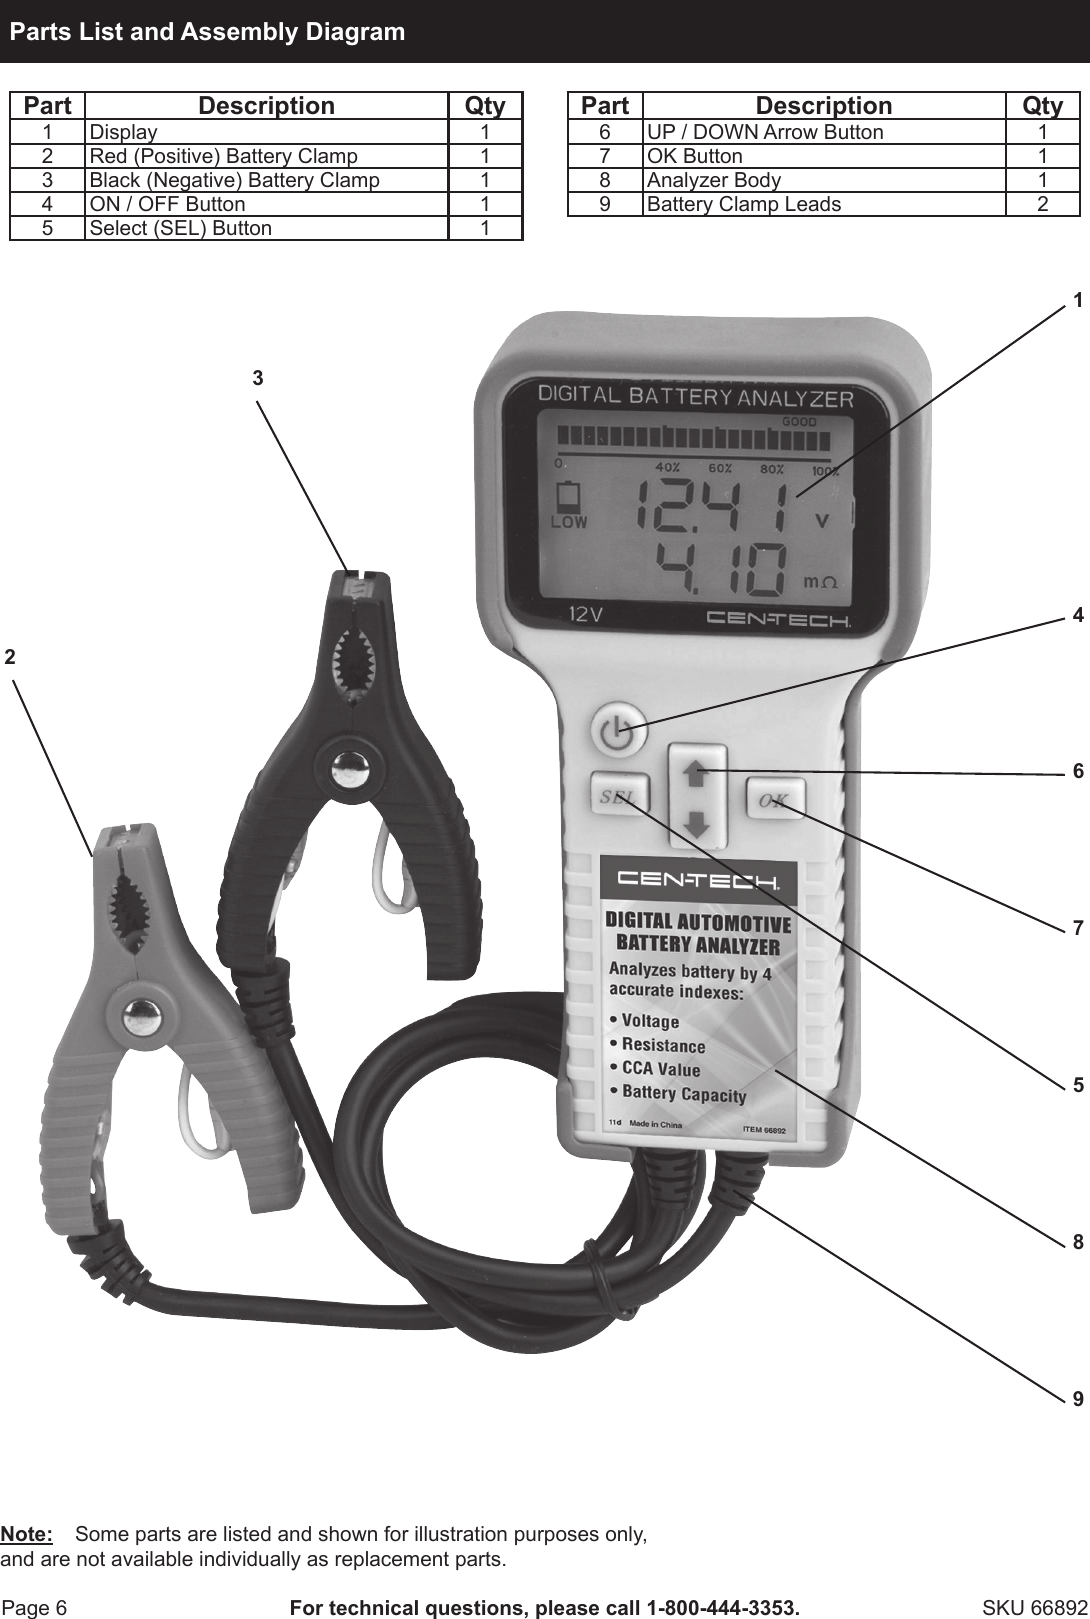 Page 6 of 8 - Harbor-Freight Harbor-Freight-Digital-Battery-Analyzer-Product-Manual-  Harbor-freight-digital-battery-analyzer-product-manual